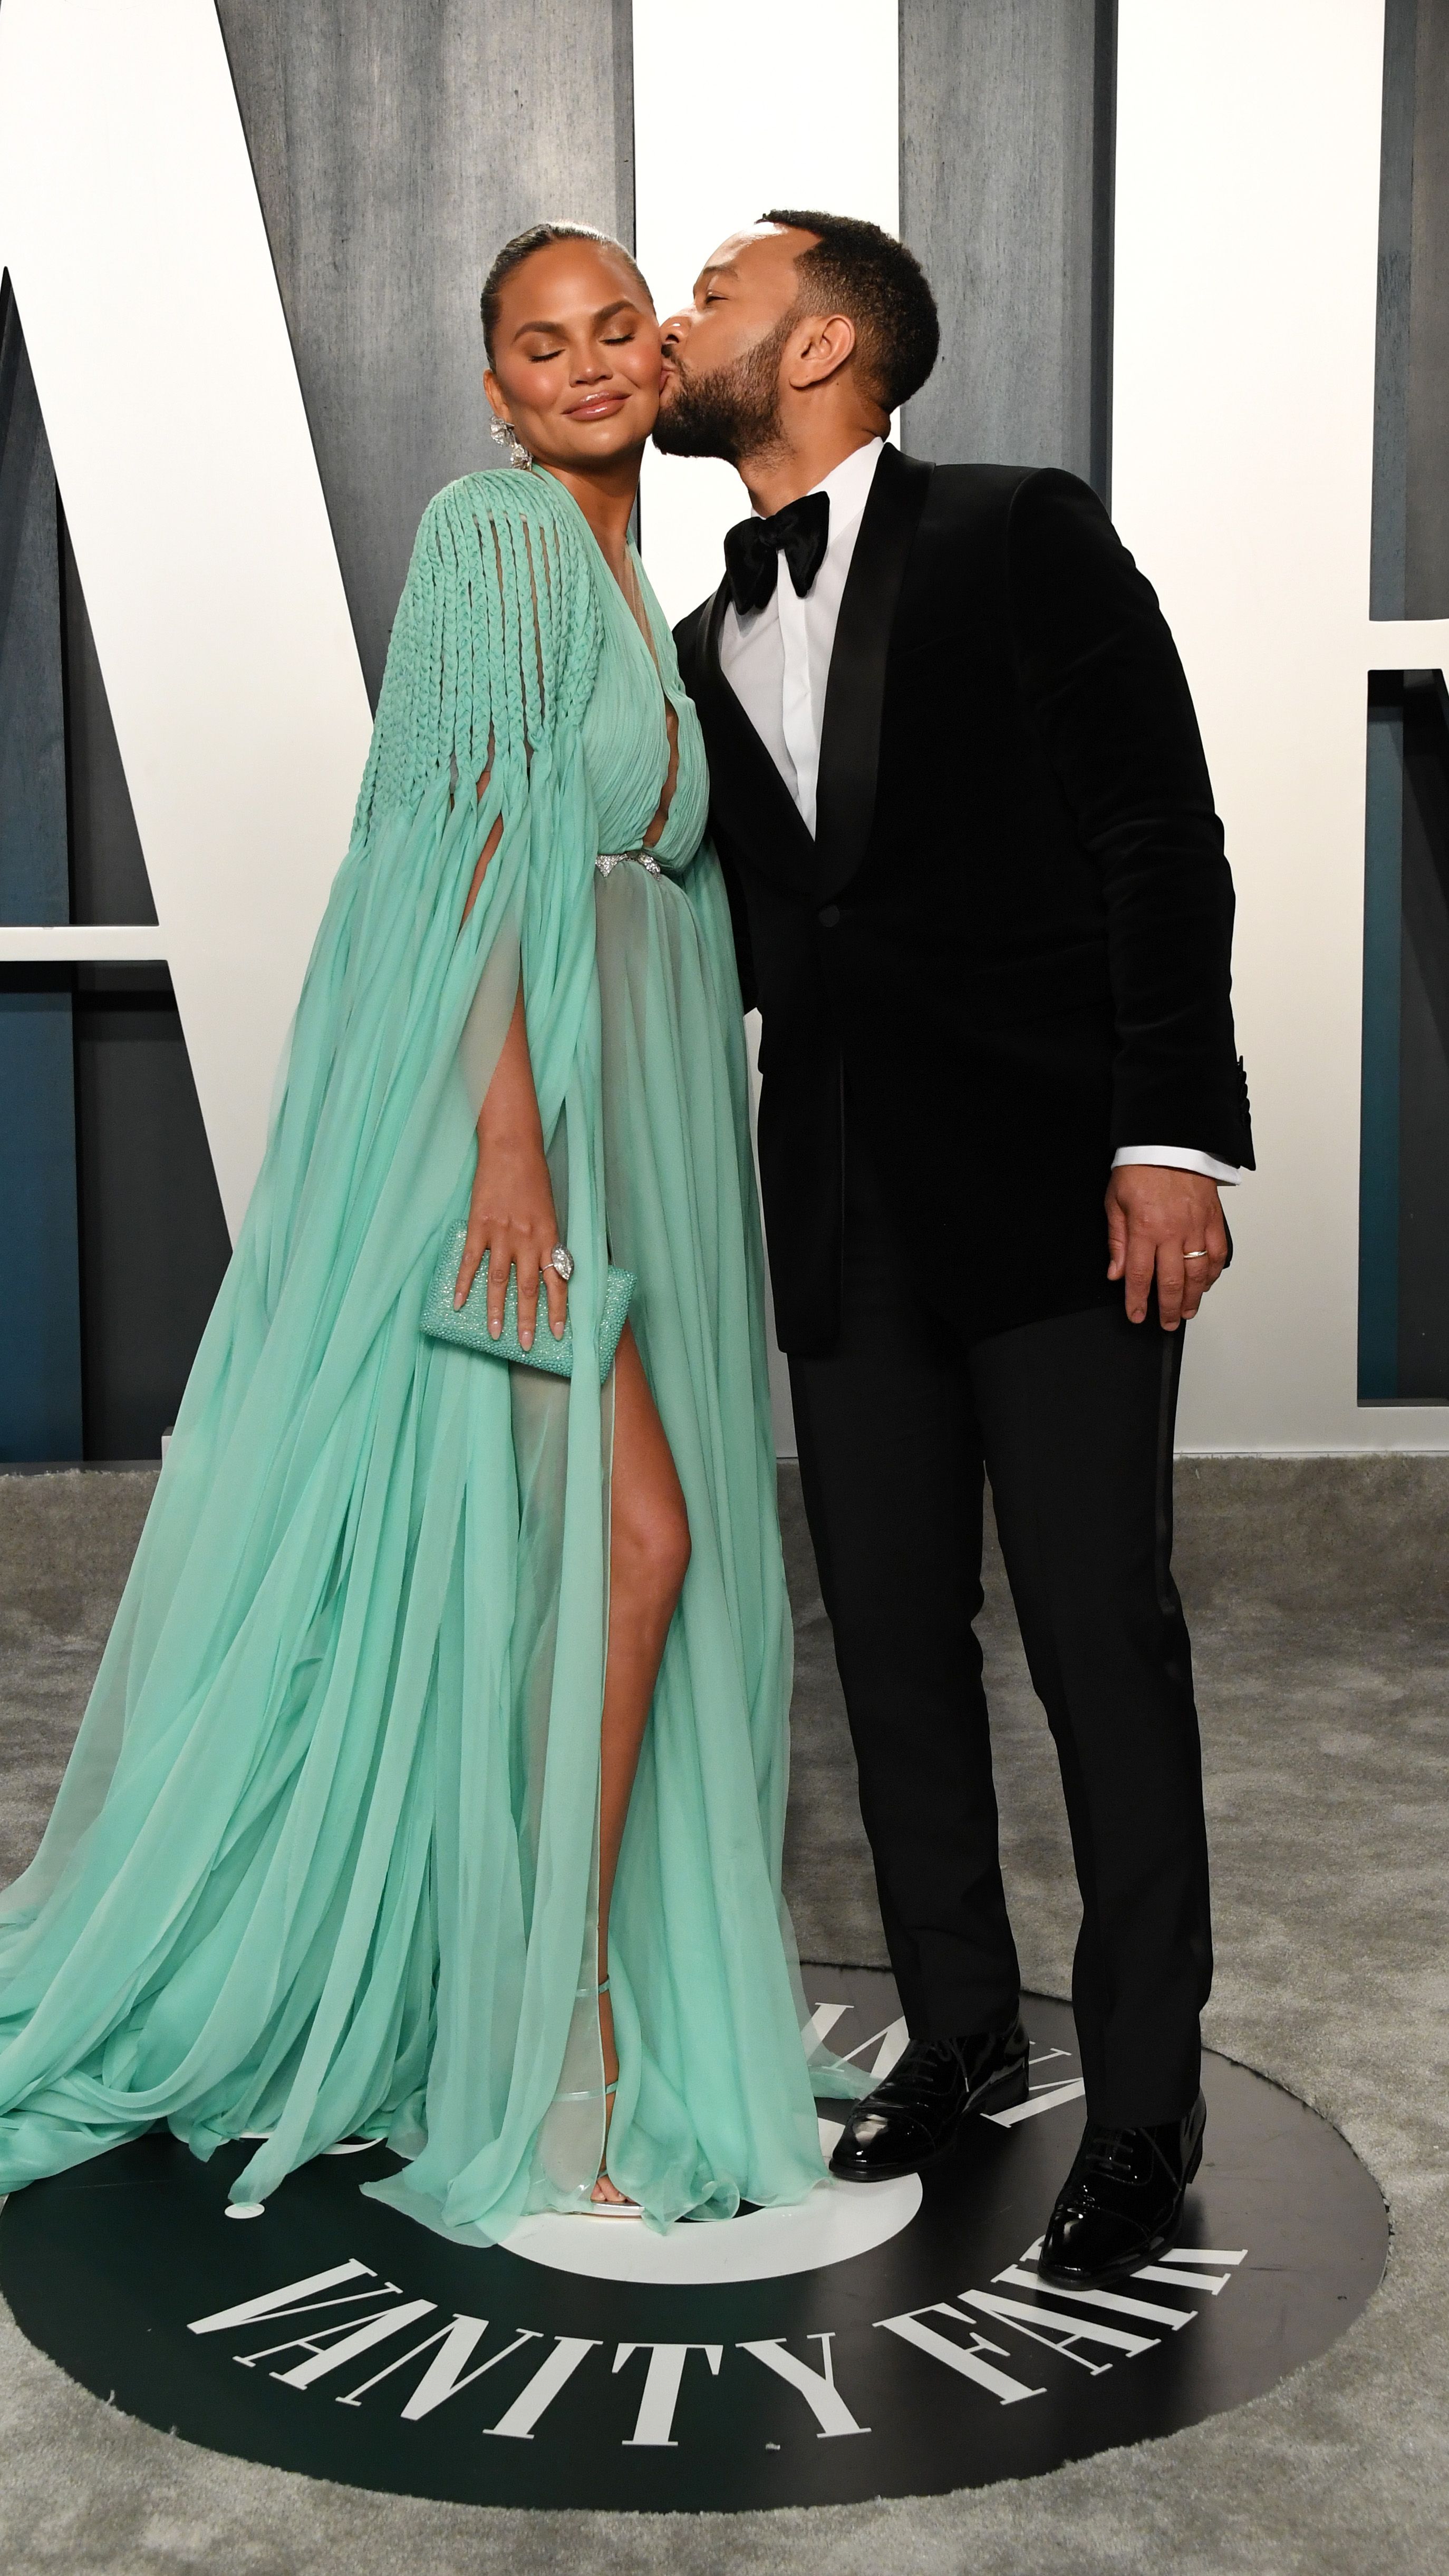 Chrissy Teigen and John Legend at the 2020 Vanity Fair Oscar Party on February 09, 2020 | Photo: Getty Images